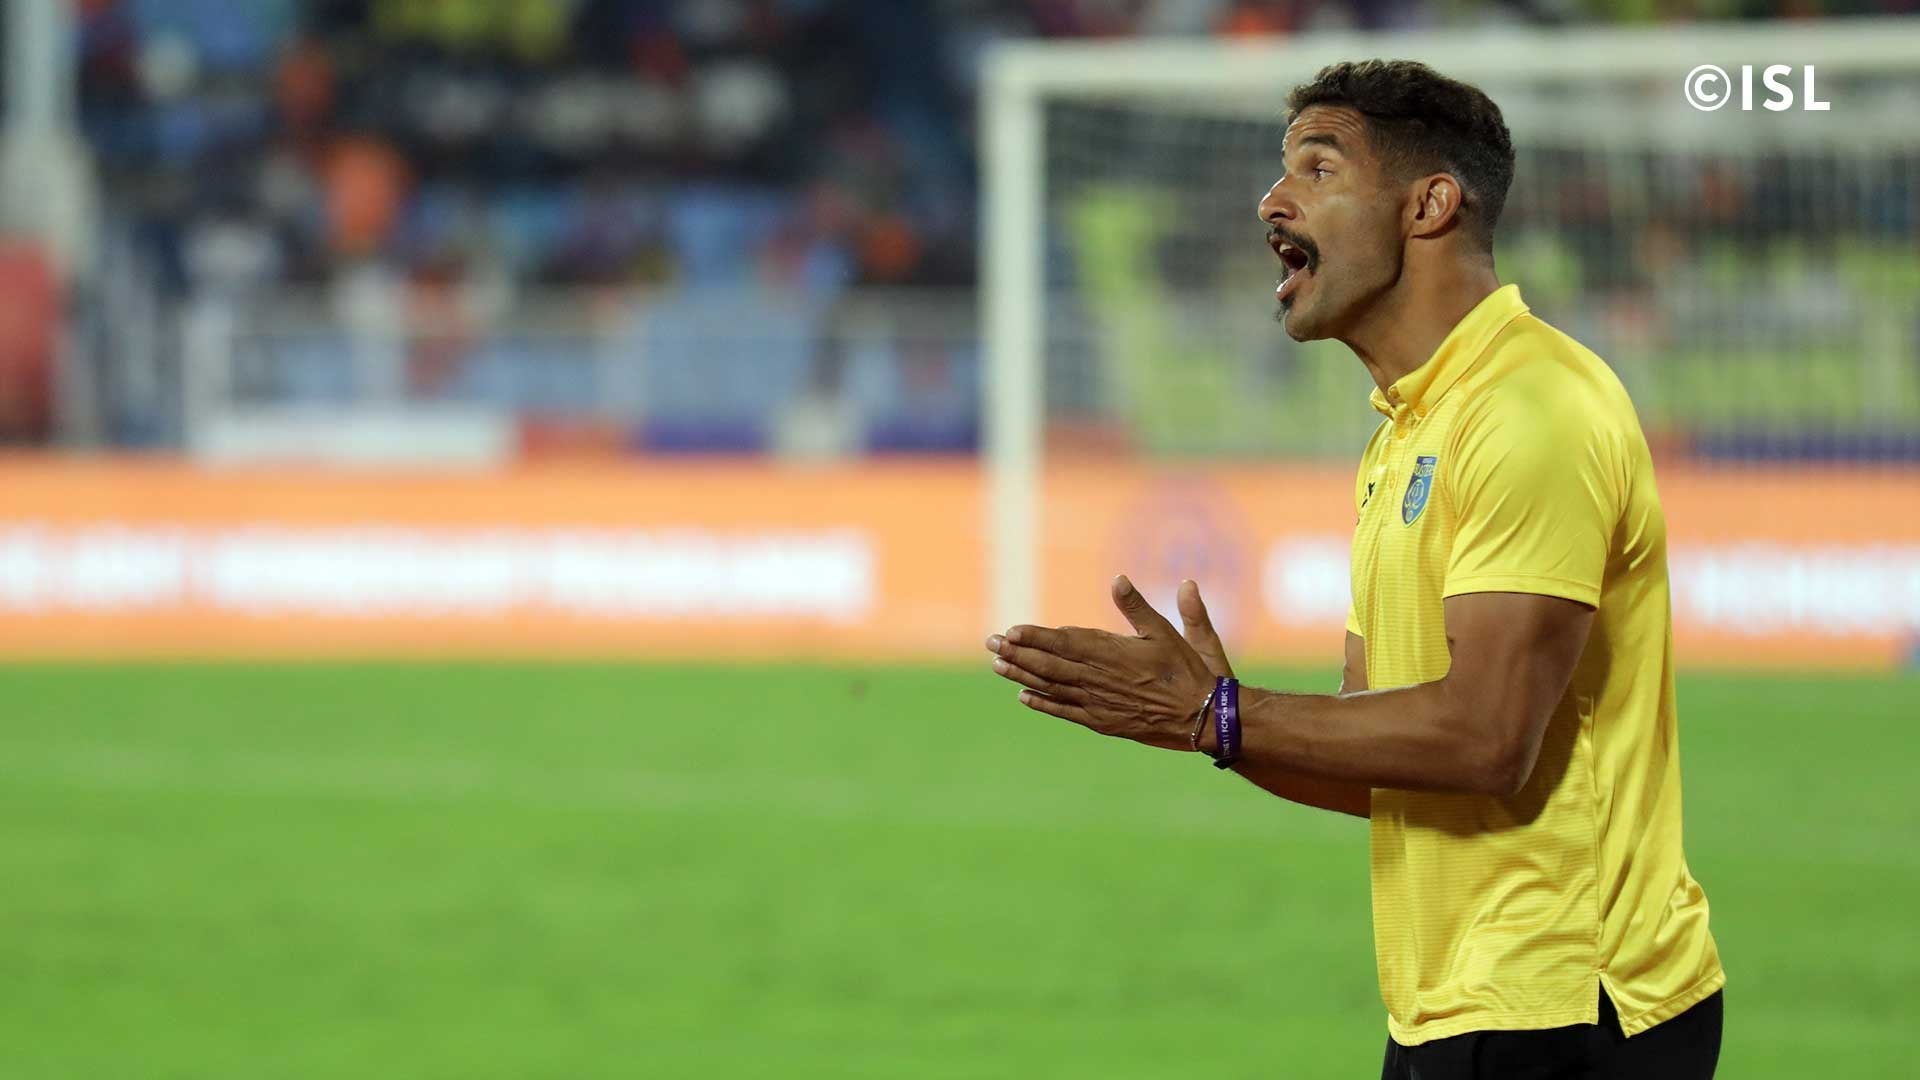 ISL 2018 | It was a game that we should have won, laments David James